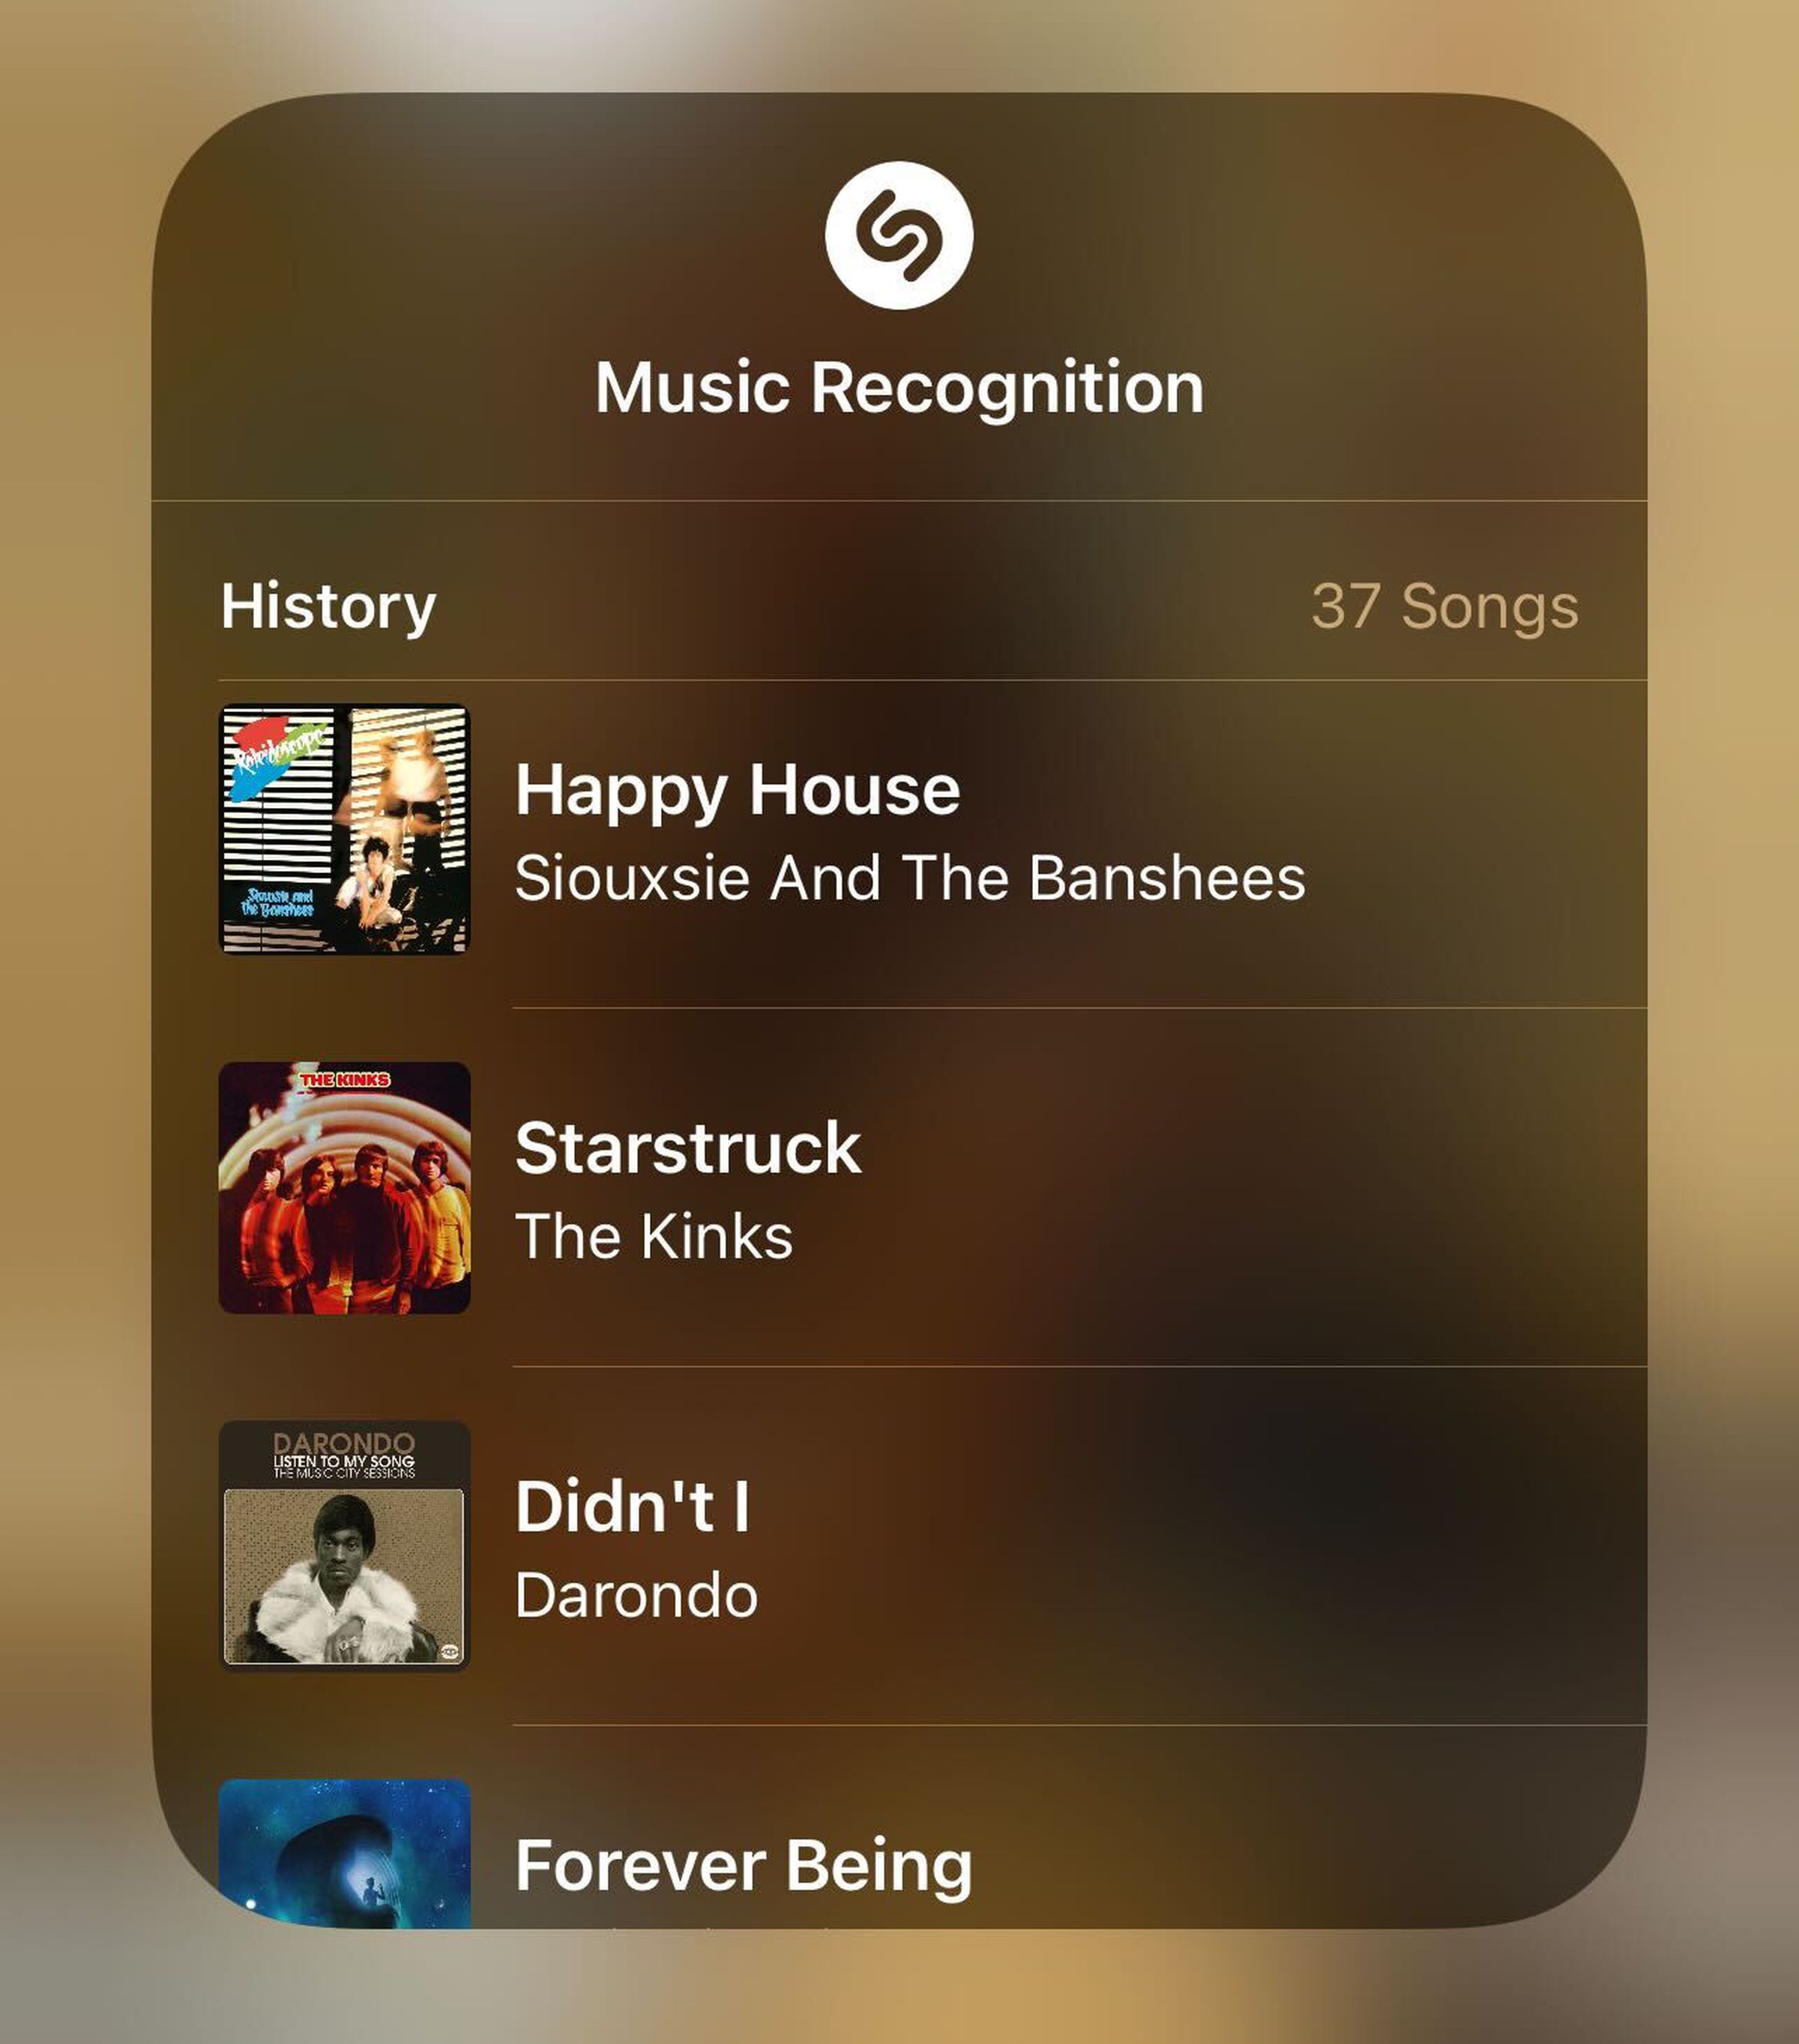 You can press and hold the Music Recognition button in the Control Center to view your Shazam’d songs on your device.